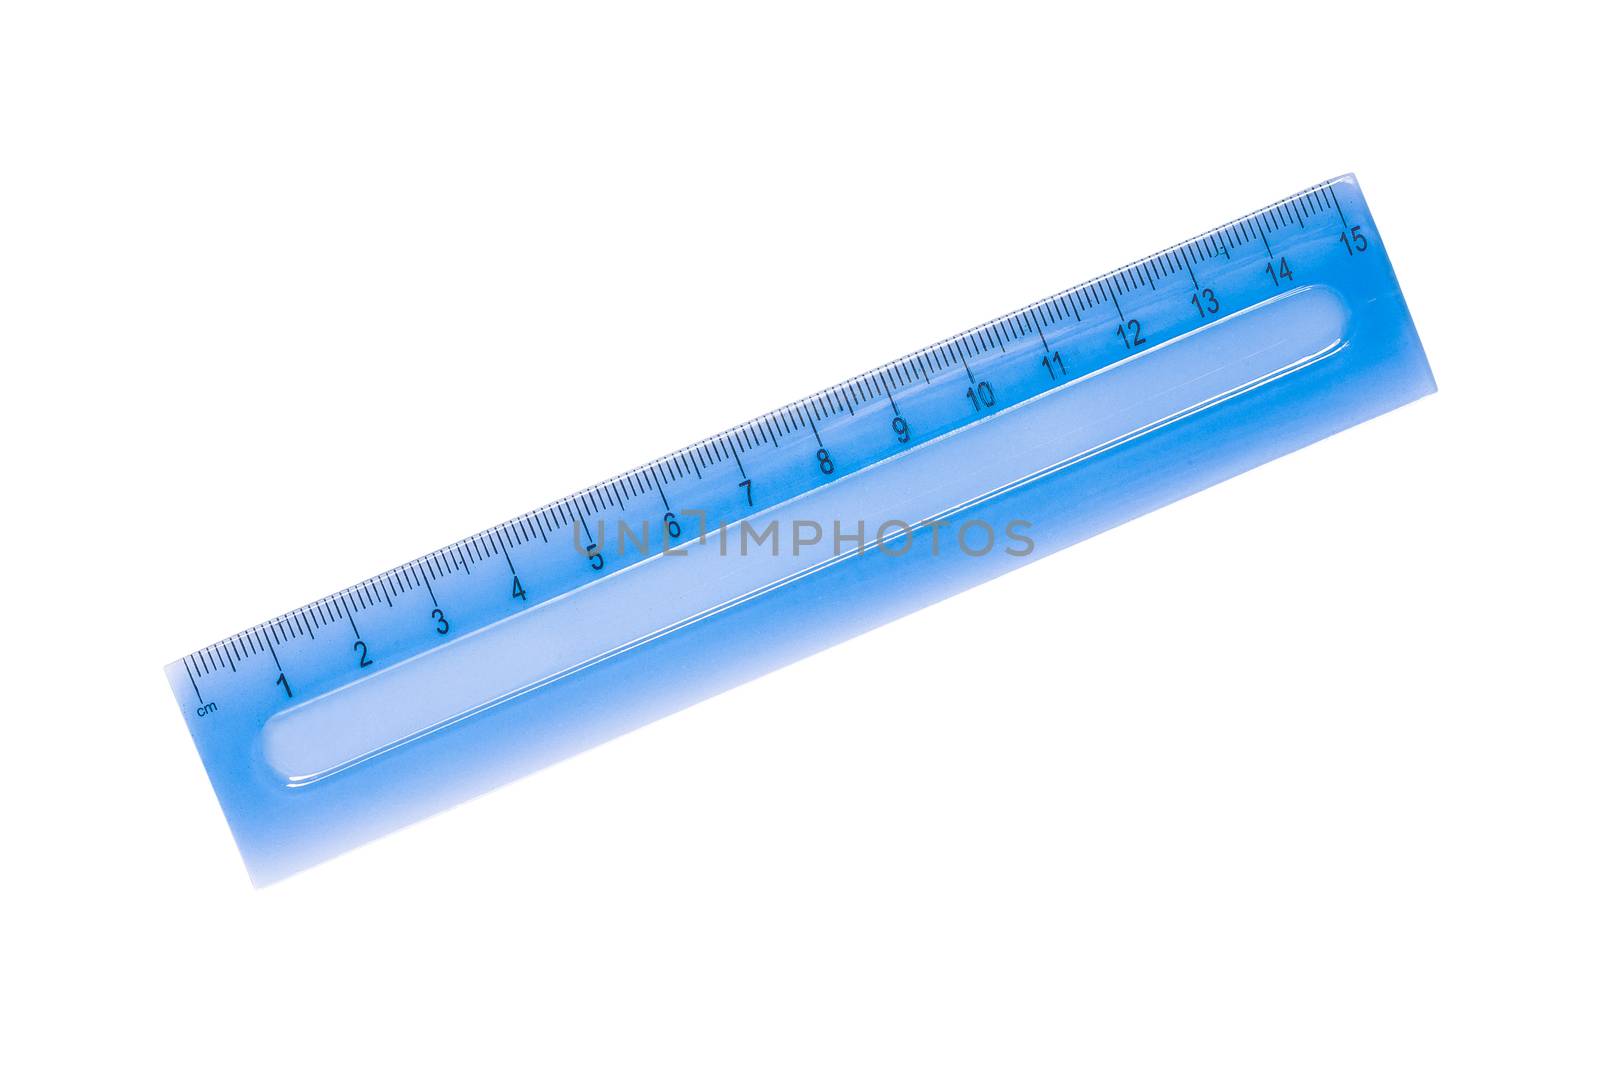 a blue school ruler isolated on white background